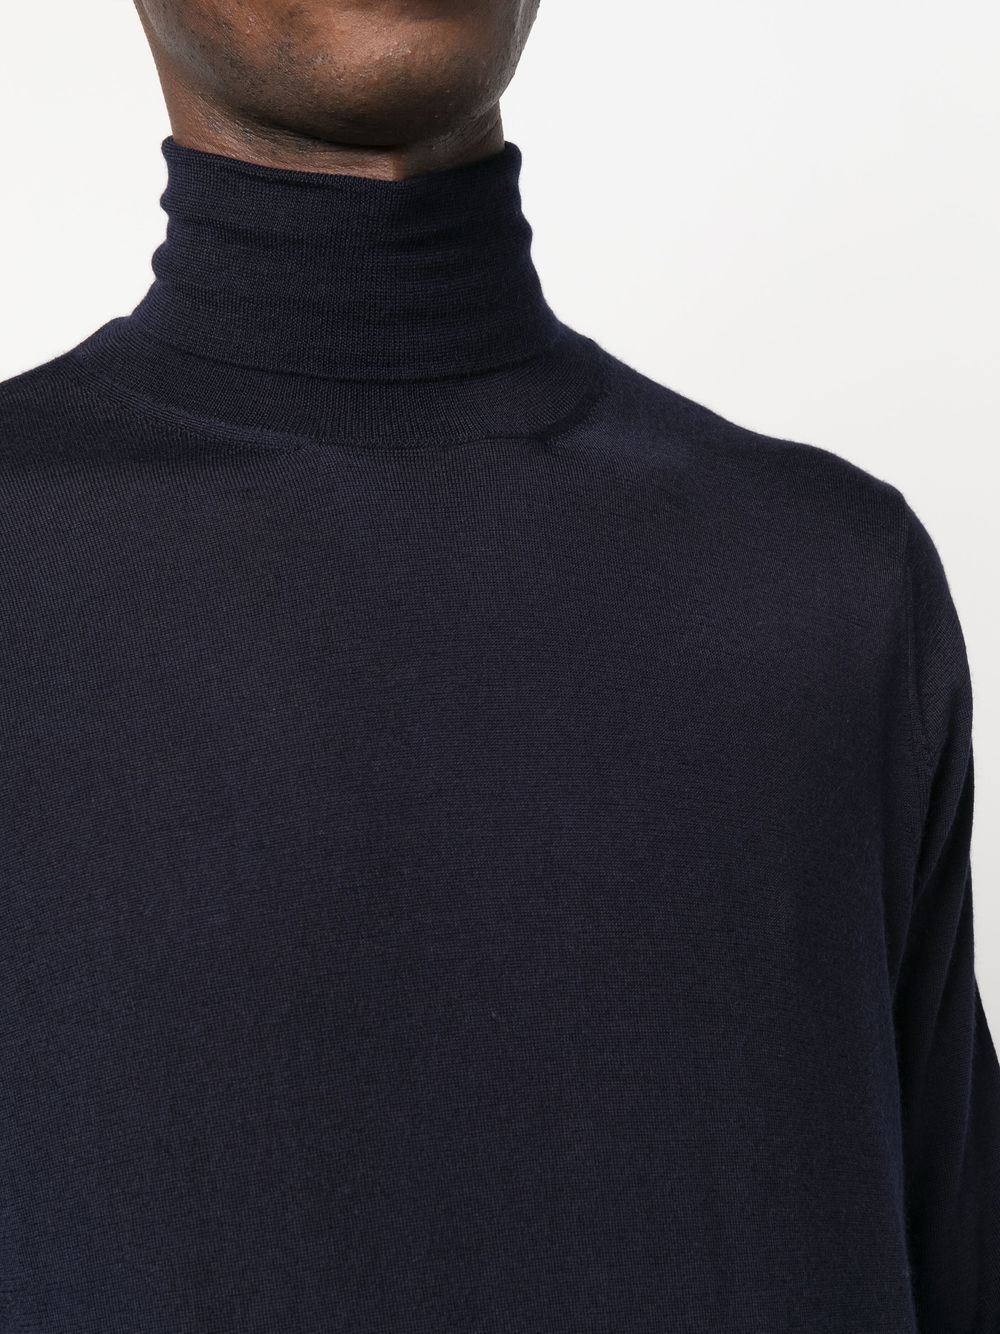 Colombo COLOMBO- Cashmere High-neck Sweater